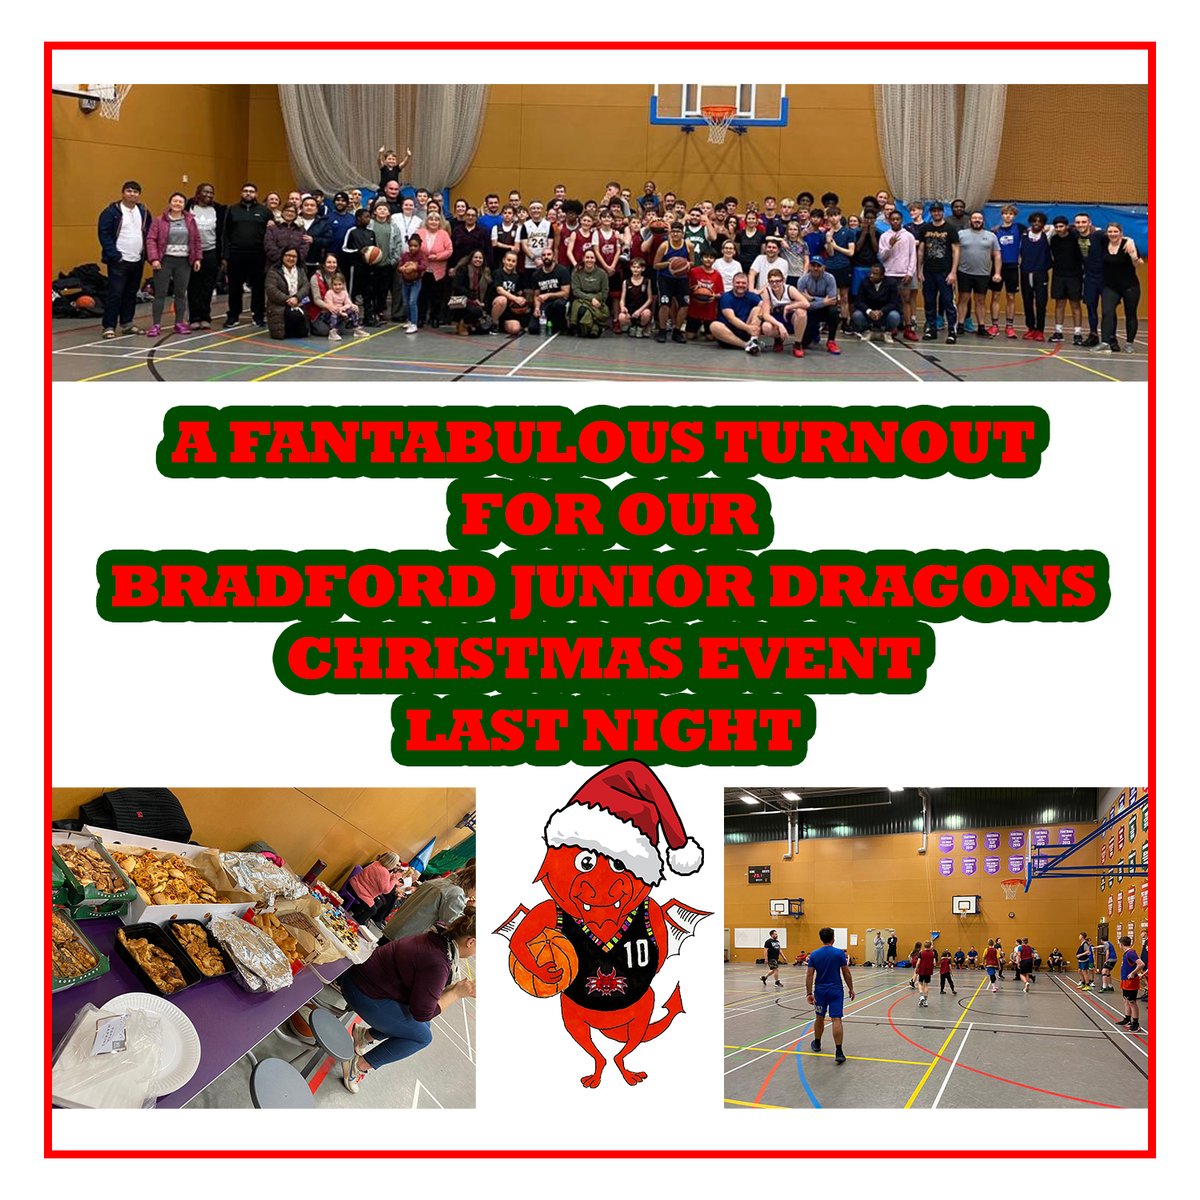 Many Thanks to everybody who attended our Bradford Junior Dragons Christmas Event last night. We had a fantastic evening of Basketball Fun and, of course, Food. A great night was had by all. #FutureStars #BradfordJuniorDragons #Basketball #OneClubOneFamily